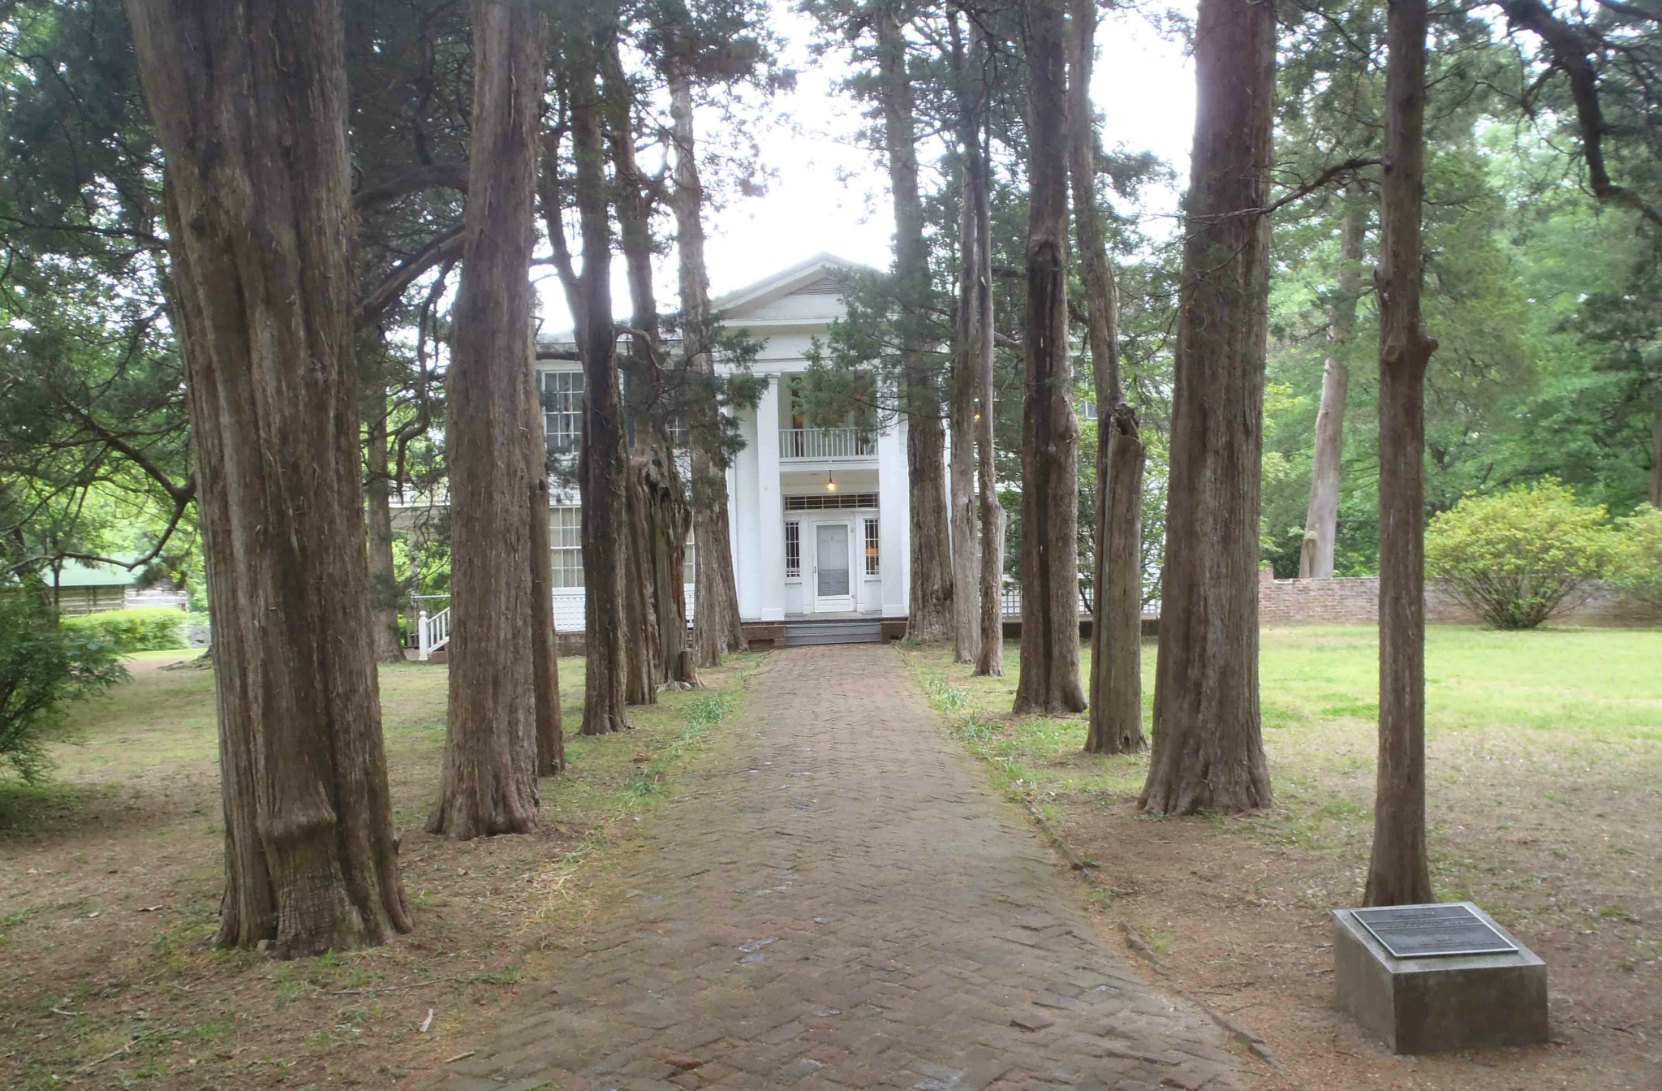 The entrance walkway to Rowan Oak, William Faulkner's home from 1930 until his death in 1962.